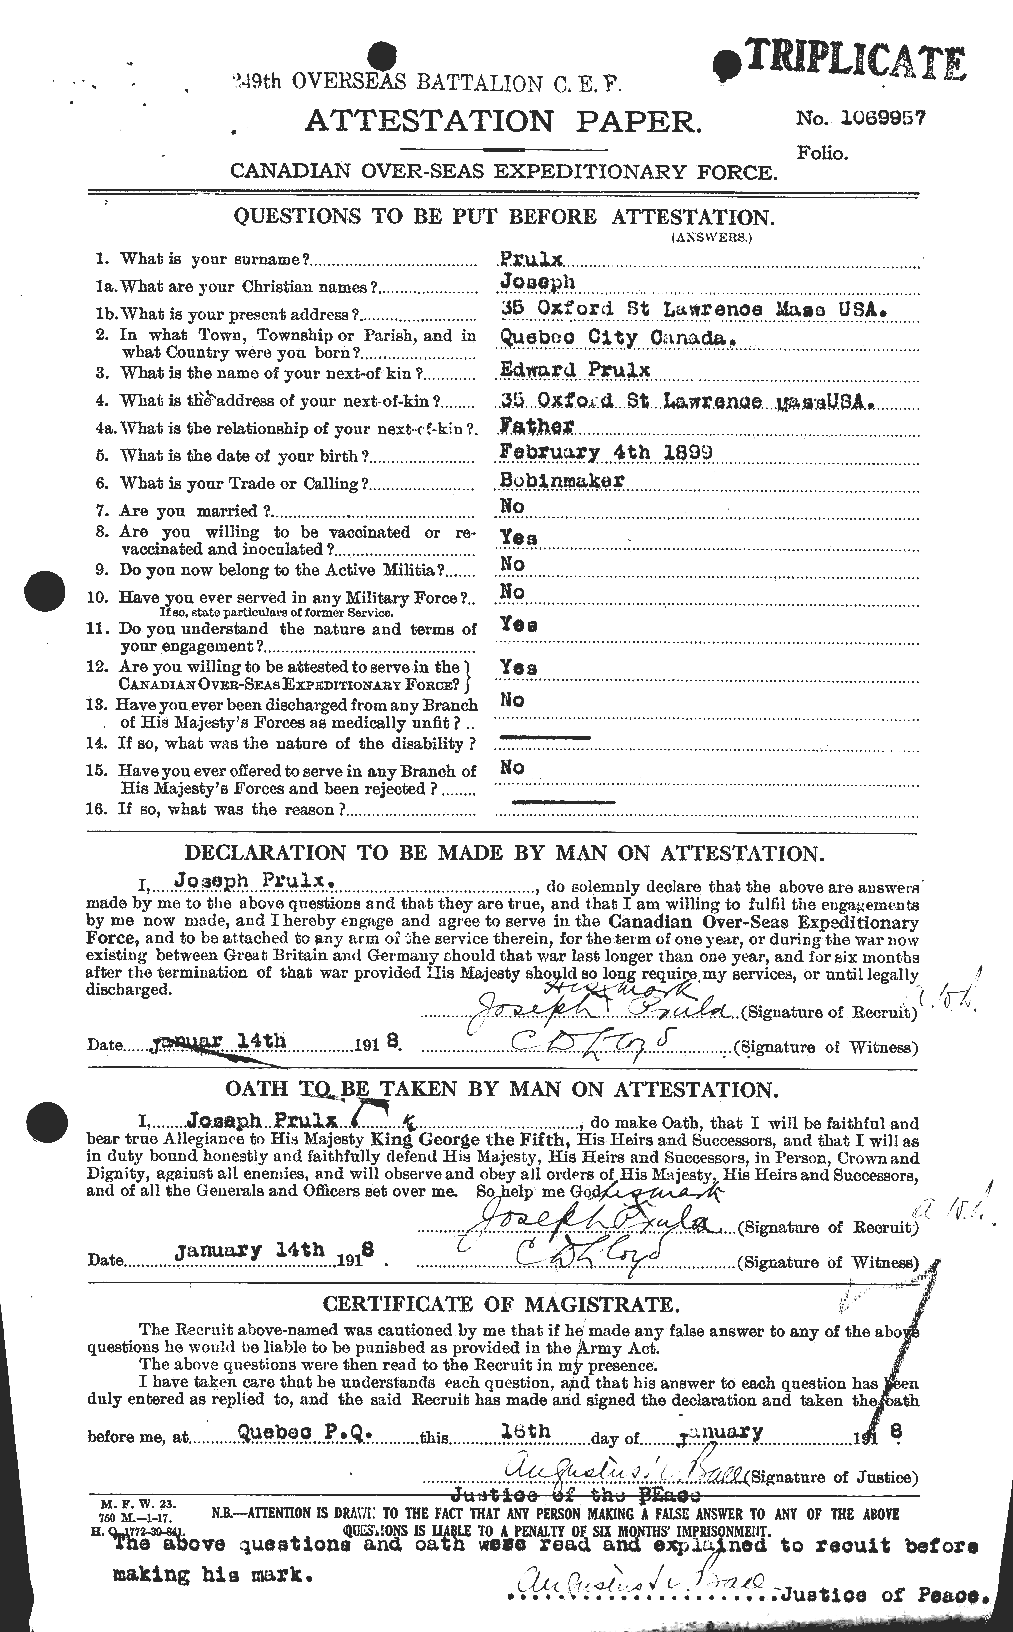 Personnel Records of the First World War - CEF 588939a